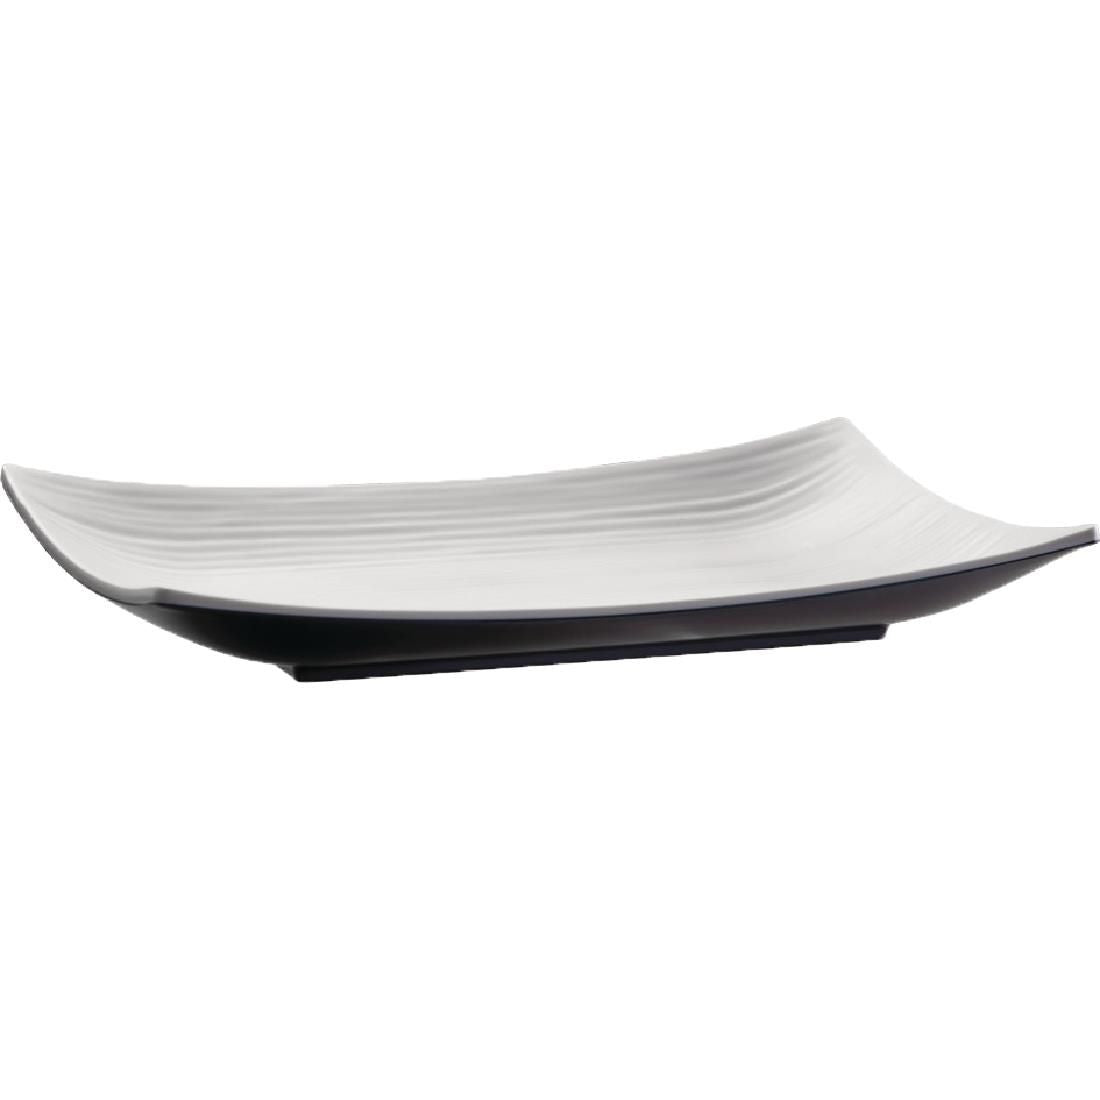 APS Dual Tone Curved Rectangular Platter 11in JD Catering Equipment Solutions Ltd